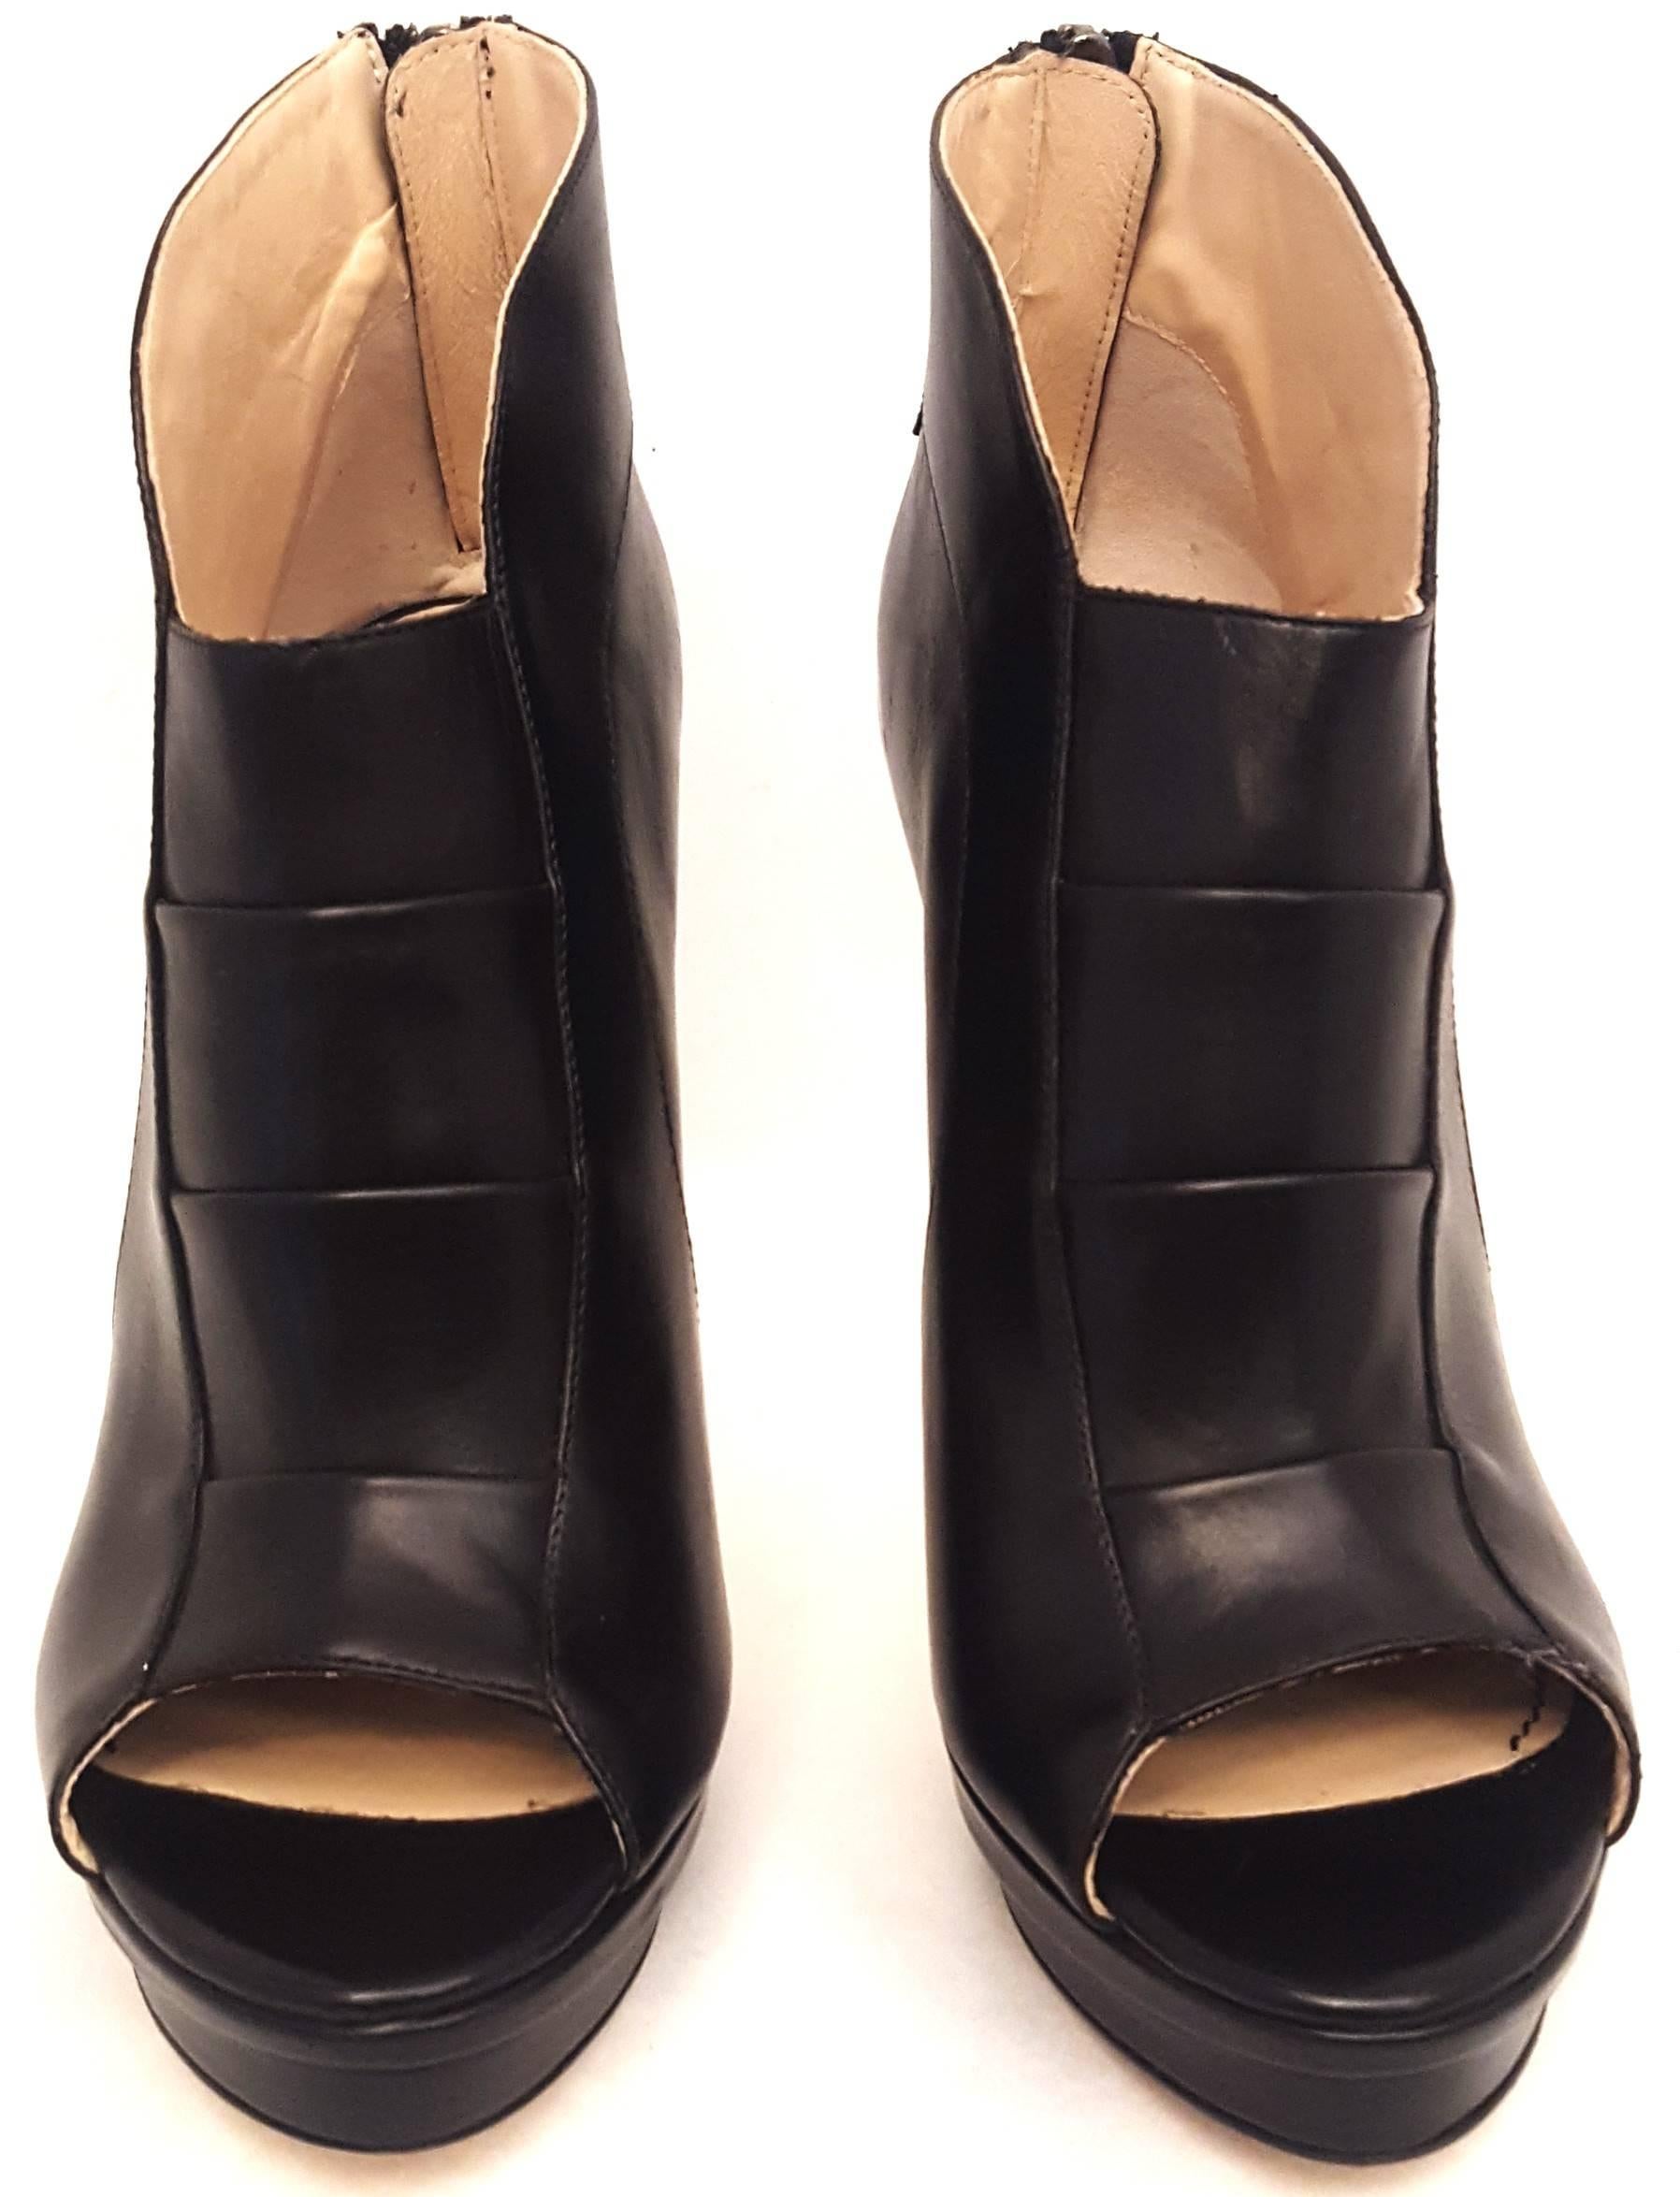 Jerome C. Rousseau Riviera black calfskin ankle boot features a back zipper and peep toe.  The vamp has detailed calfskin straps across it for added texture.  These boots are fully lined in beige leather and the back zipper at heel makes it great